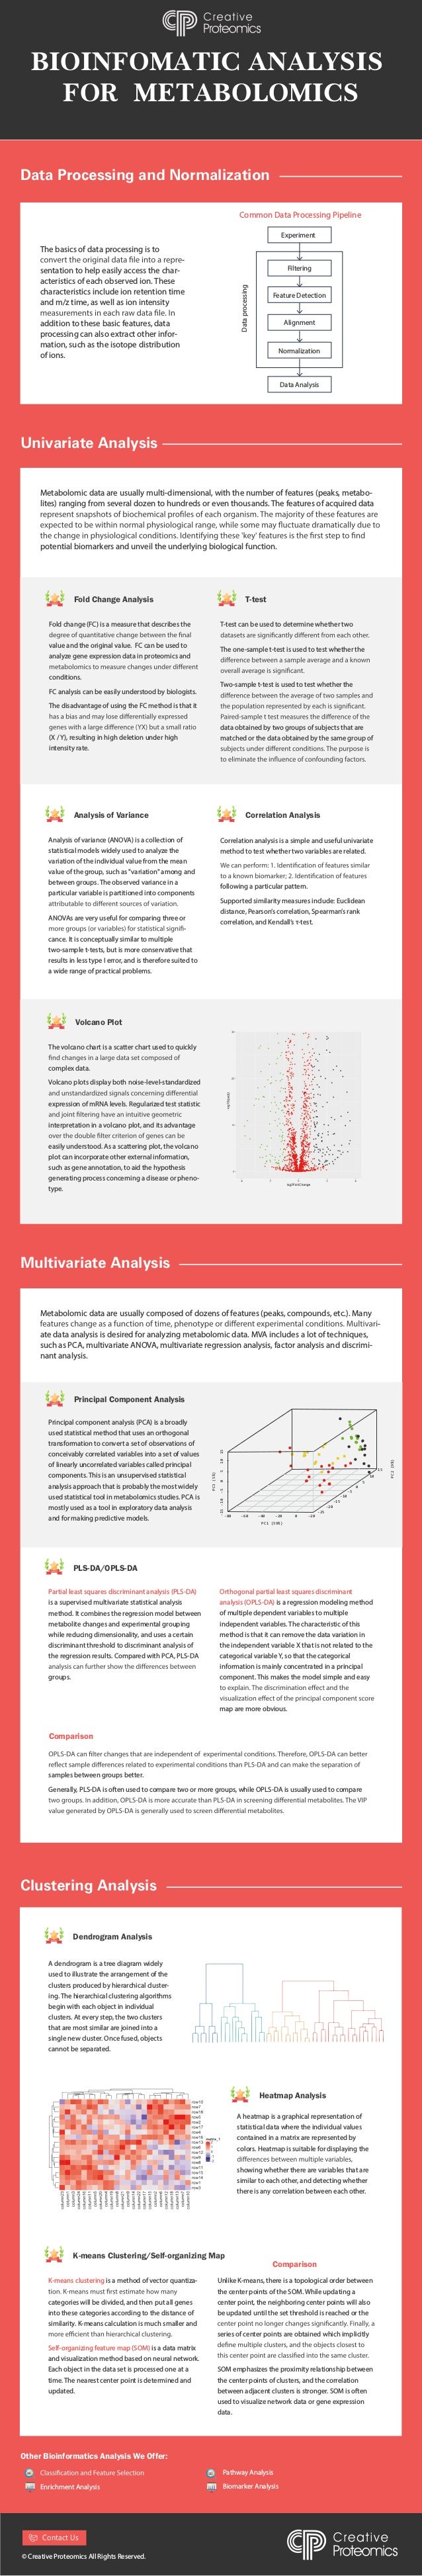 BIOINFOMATIC ANALYSIS
FOR METABOLOMICS
Data Processing and Normalization
Univariate Analysis
The basics of data processing is to
-
sentation to help easily access the char-
acteristics of each observed ion. These
characteristics include ion retention time
and m/z time, as well as ion intensity
addition to these basic features, data
processing can also extract other infor-
mation, such as the isotope distribution
of ions.
Common Data Processing Pipeline
Experiment
Filtering
Feature Detection
Alignment
Normalization
Data Analysis
Data
processing
Fold Change Analysis T-test
Analysis of Variance
Fold change (FC) is a measure that describes the
value and the original value. FC can be used to
analyze gene expression data in proteomics and
conditions.
FC analysis can be easily understood by biologists.
The disadvantage of using the FC method is that it
(X / Y), resulting in high deletion under high
intensity rate.
Metabolomic data are usually multi-dimensional, with the number of features (peaks, metabo-
lites) ranging from several dozen to hundreds or even thousands. The features of acquired data
potential biomarkers and unveil the underlying biological function.
T-test can be used to determine whether two
The one-sample t-test is used to test whether the
Two-sample t-test is used to test whether the
data obtained by two groups of subjects that are
matched or the data obtained by the same group of
Analysis of variance (ANOVA) is a collection of
statistical models widely used to analyze the
variation of the individual value from the mean
value of the group, such as "variation" among and
between groups. The observed variance in a
particular variable is partitioned into components
ANOVAs are very useful for comparing three or
-
cance. It is conceptually similar to multiple
two-sample t-tests, but is more conservative that
results in less type I error, and is therefore suited to
a wide range of practical problems.
Volcano Plot
The volcano chart is a scatter chart used to quickly
complex data.
Volcano plots display both noise-level-standardized
expression of mRNA levels. Regularized test statistic
interpretation in a volcano plot, and its advantage
easily understood. As a scattering plot, the volcano
plot can incorporate other external information,
such as gene annotation, to aid the hypothesis
generating process concerning a disease or pheno-
type.
Correlation Analysis
Correlation analysis is a simple and useful univariate
method to test whether two variables are related.
following a particular pattern.
Supported similarity measures include: Euclidean
distance, Pearson’s correlation, Spearman’s rank
correlation, and Kendall’s τ-test.
Partial least squares discriminant analysis (PLS-DA)
is a supervised multivariate statistical analysis
method. It combines the regression model between
metabolite changes and experimental grouping
while reducing dimensionality, and uses a certain
discriminant threshold to discriminant analysis of
the regression results. Compared with PCA, PLS-DA
groups.
Multivariate Analysis
Clustering Analysis
Metabolomic data are usually composed of dozens of features (peaks, compounds, etc.). Many
-
ate data analysis is desired for analyzing metabolomic data. MVA includes a lot of techniques,
such as PCA, multivariate ANOVA, multivariate regression analysis, factor analysis and discrimi-
nant analysis.
Principal component analysis (PCA) is a broadly
used statistical method that uses an orthogonal
transformation to convert a set of observations of
conceivably correlated variables into a set of values
of linearly uncorrelated variables called principal
components. This is an unsupervised statistical
analysis approach that is probably the most widely
used statistical tool in metabolomics studies. PCA is
mostly used as a tool in exploratory data analysis
and for making predictive models.
Principal Component Analysis
Dendrogram Analysis
K-means Clustering/Self-organizing Map
Heatmap Analysis
PLS-DA/OPLS-DA
Orthogonal partial least squares discriminant
analysis (OPLS-DA) is a regression modeling method
of multiple dependent variables to multiple
independent variables. The characteristic of this
method is that it can remove the data variation in
the independent variable X that is not related to the
categorical variable Y, so that the categorical
information is mainly concentrated in a principal
component. This makes the model simple and easy
map are more obvious.
samples between groups better.
Generally, PLS-DA is often used to compare two or more groups, while OPLS-DA is usually used to compare
Comparison
A dendrogram is a tree diagram widely
used to illustrate the arrangement of the
clusters produced by hierarchical cluster-
ing. The hierarchical clustering algorithms
begin with each object in individual
clusters. At every step, the two clusters
that are most similar are joined into a
single new cluster. Once fused, objects
cannot be separated.
A heatmap is a graphical representation of
statistical data where the individual values
contained in a matrix are represented by
colors. Heatmap is suitable for displaying the
showing whether there are variables that are
similar to each other, and detecting whether
there is any correlation between each other.
K-means clustering is a method of vector quantiza-
categories will be divided, and then put all genes
into these categories according to the distance of
similarity. K-means calculation is much smaller and
Self-organizing feature map (SOM) is a data matrix
and visualization method based on neural network.
Each object in the data set is processed one at a
time. The nearest center point is determined and
updated.
Unlike K-means, there is a topological order between
the center points of the SOM. While updating a
center point, the neighboring center points will also
be updated until the set threshold is reached or the
series of center points are obtained which implicitly
SOM emphasizes the proximity relationship between
the center points of clusters, and the correlation
between adjacent clusters is stronger. SOM is often
used to visualize network data or gene expression
data.
Comparison
Other Bioinformatics Analysis We Offer:
Enrichment Analysis
Pathway Analysis
Biomarker Analysis
© Creative Proteomics All Rights Reserved.
PC1 (59%)
PC3
(5%)
PC2
(9%)
0
5
10
15
-5
-10
-15
-80 -60 -40 -20 -20
-20
-15
-10
-5
0
5
10
15
-25
0
Contact Us
 